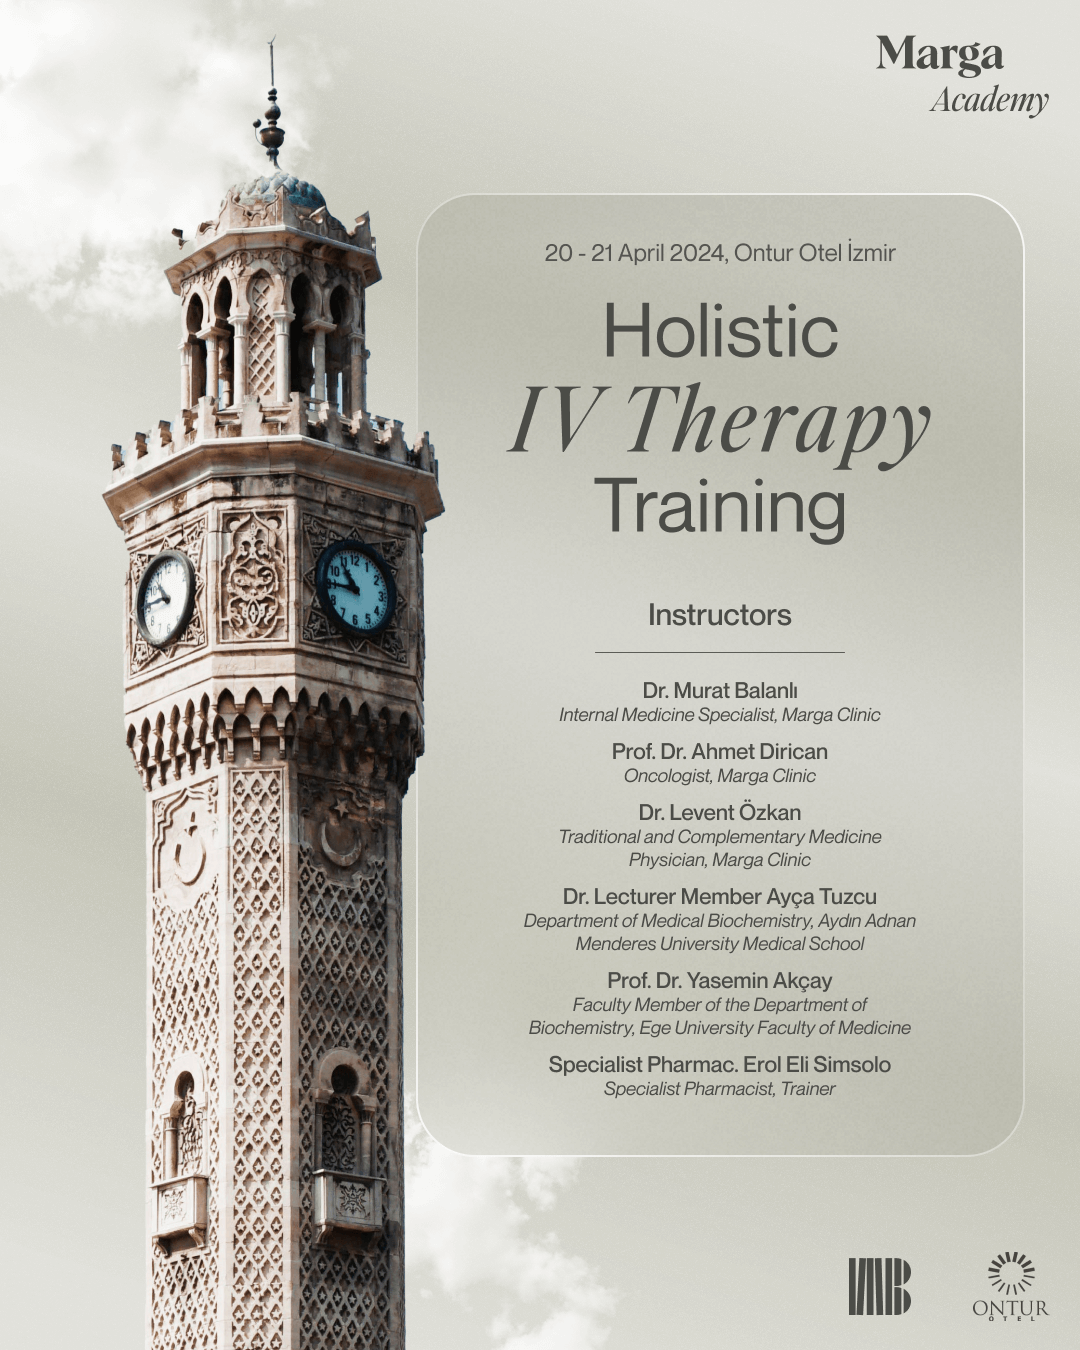 20 - 21 April Holistic IV Therapy Training